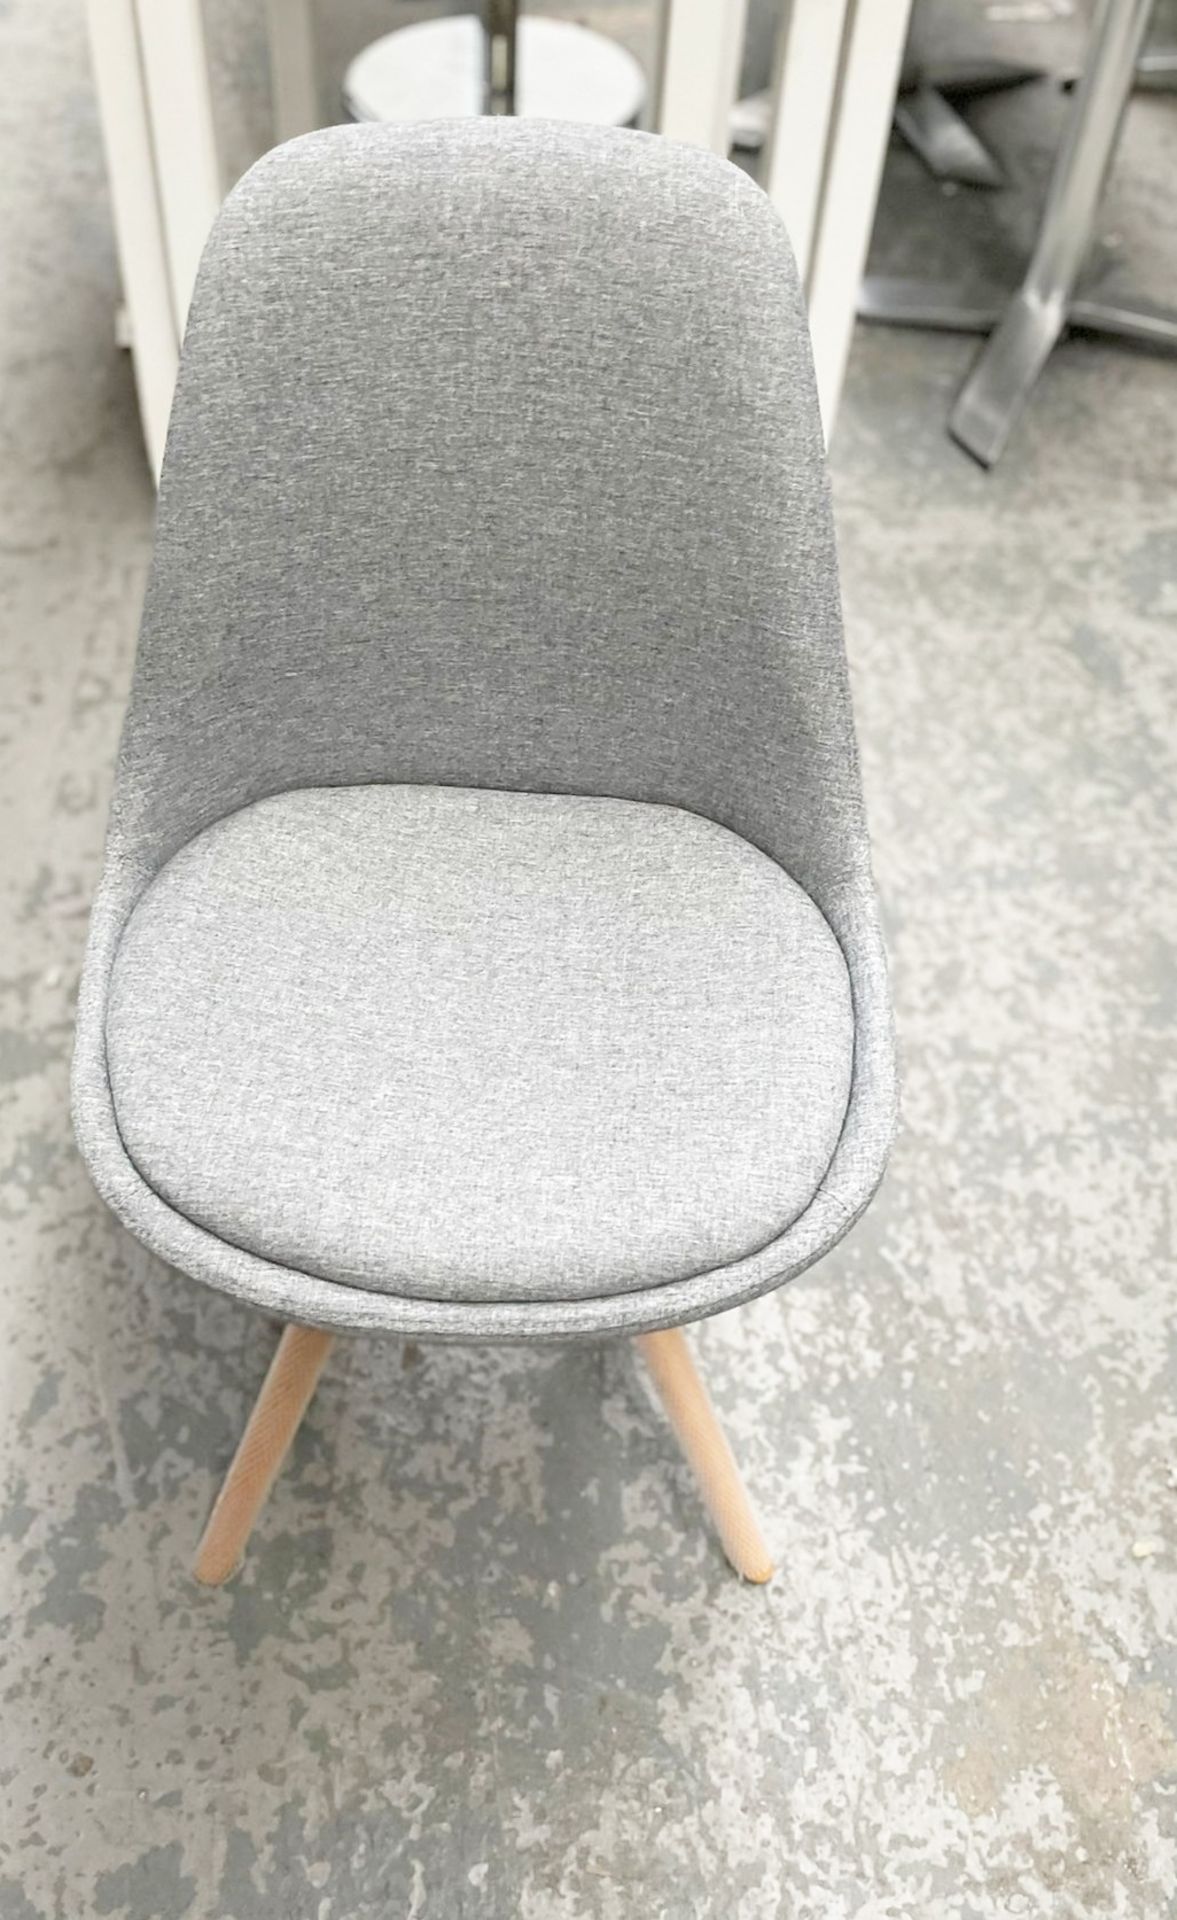 4 x Upholstered Turner Chair In Grey- Dimensions: 86(h) x 50(w) x 40(d) cm - Brand New Unboxed - Image 6 of 6